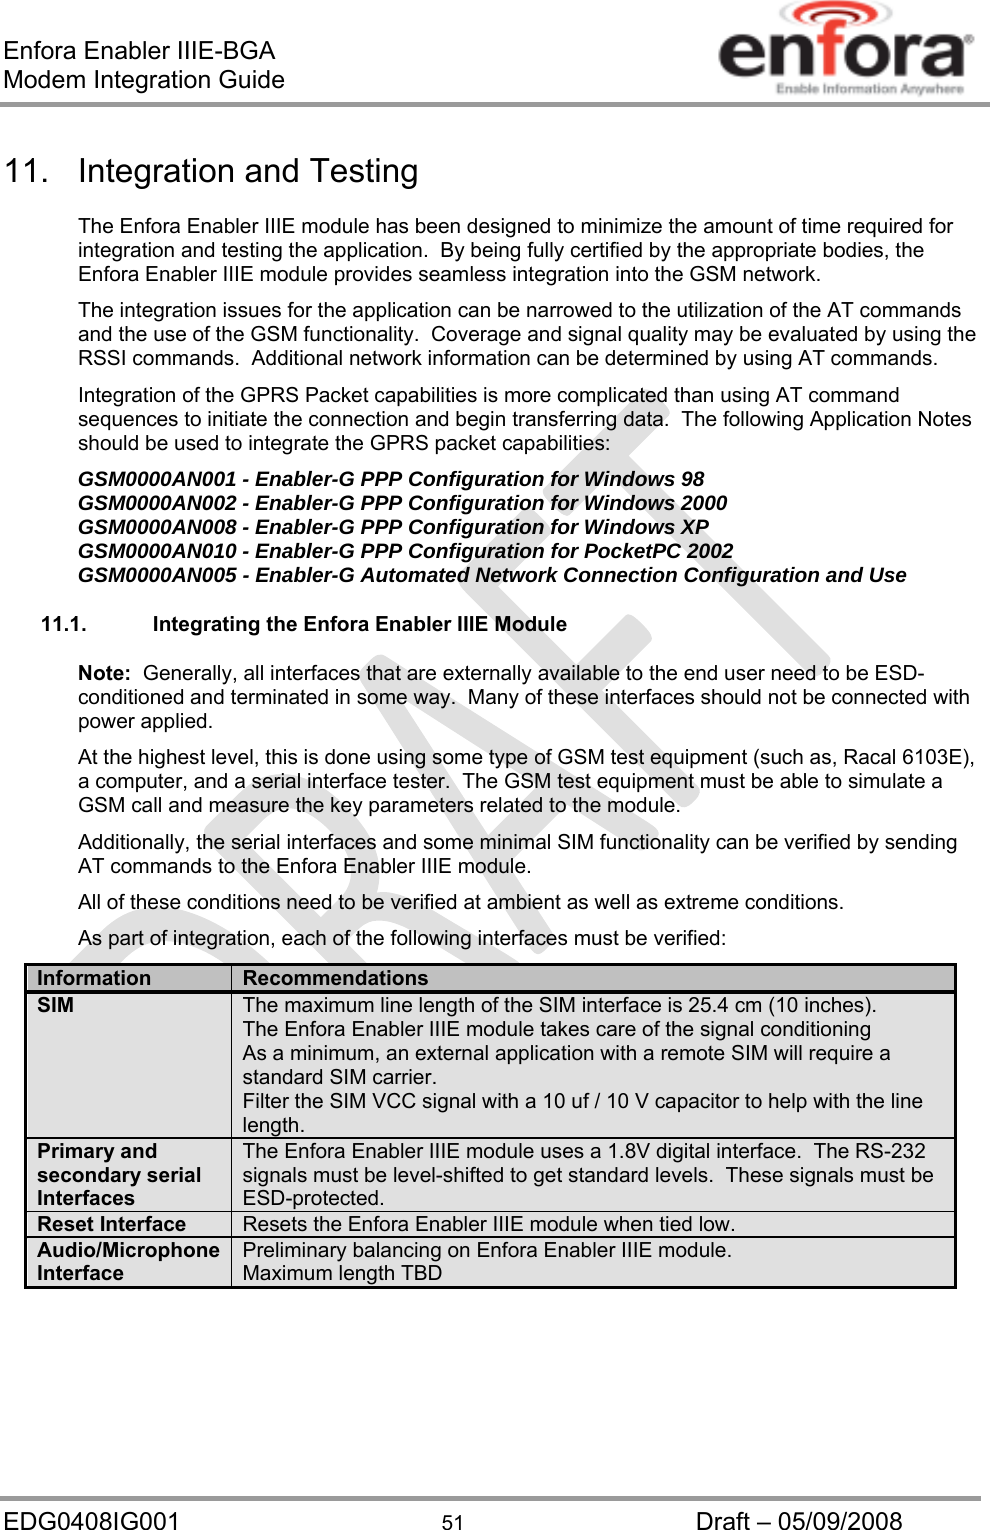 Enfora Enabler IIIE-BGA Modem Integration Guide EDG0408IG001  51  Draft – 05/09/2008 11. Integration and Testing The Enfora Enabler IIIE module has been designed to minimize the amount of time required for integration and testing the application.  By being fully certified by the appropriate bodies, the Enfora Enabler IIIE module provides seamless integration into the GSM network. The integration issues for the application can be narrowed to the utilization of the AT commands and the use of the GSM functionality.  Coverage and signal quality may be evaluated by using the RSSI commands.  Additional network information can be determined by using AT commands. Integration of the GPRS Packet capabilities is more complicated than using AT command sequences to initiate the connection and begin transferring data.  The following Application Notes should be used to integrate the GPRS packet capabilities: GSM0000AN001 - Enabler-G PPP Configuration for Windows 98 GSM0000AN002 - Enabler-G PPP Configuration for Windows 2000 GSM0000AN008 - Enabler-G PPP Configuration for Windows XP GSM0000AN010 - Enabler-G PPP Configuration for PocketPC 2002 GSM0000AN005 - Enabler-G Automated Network Connection Configuration and Use 11.1.  Integrating the Enfora Enabler IIIE Module Note:  Generally, all interfaces that are externally available to the end user need to be ESD-conditioned and terminated in some way.  Many of these interfaces should not be connected with power applied. At the highest level, this is done using some type of GSM test equipment (such as, Racal 6103E), a computer, and a serial interface tester.  The GSM test equipment must be able to simulate a GSM call and measure the key parameters related to the module.   Additionally, the serial interfaces and some minimal SIM functionality can be verified by sending AT commands to the Enfora Enabler IIIE module. All of these conditions need to be verified at ambient as well as extreme conditions. As part of integration, each of the following interfaces must be verified: Information  Recommendations SIM  The maximum line length of the SIM interface is 25.4 cm (10 inches). The Enfora Enabler IIIE module takes care of the signal conditioning As a minimum, an external application with a remote SIM will require a standard SIM carrier. Filter the SIM VCC signal with a 10 uf / 10 V capacitor to help with the line length. Primary and secondary serial Interfaces The Enfora Enabler IIIE module uses a 1.8V digital interface.  The RS-232 signals must be level-shifted to get standard levels.  These signals must be ESD-protected. Reset Interface  Resets the Enfora Enabler IIIE module when tied low. Audio/Microphone Interface Preliminary balancing on Enfora Enabler IIIE module. Maximum length TBD 